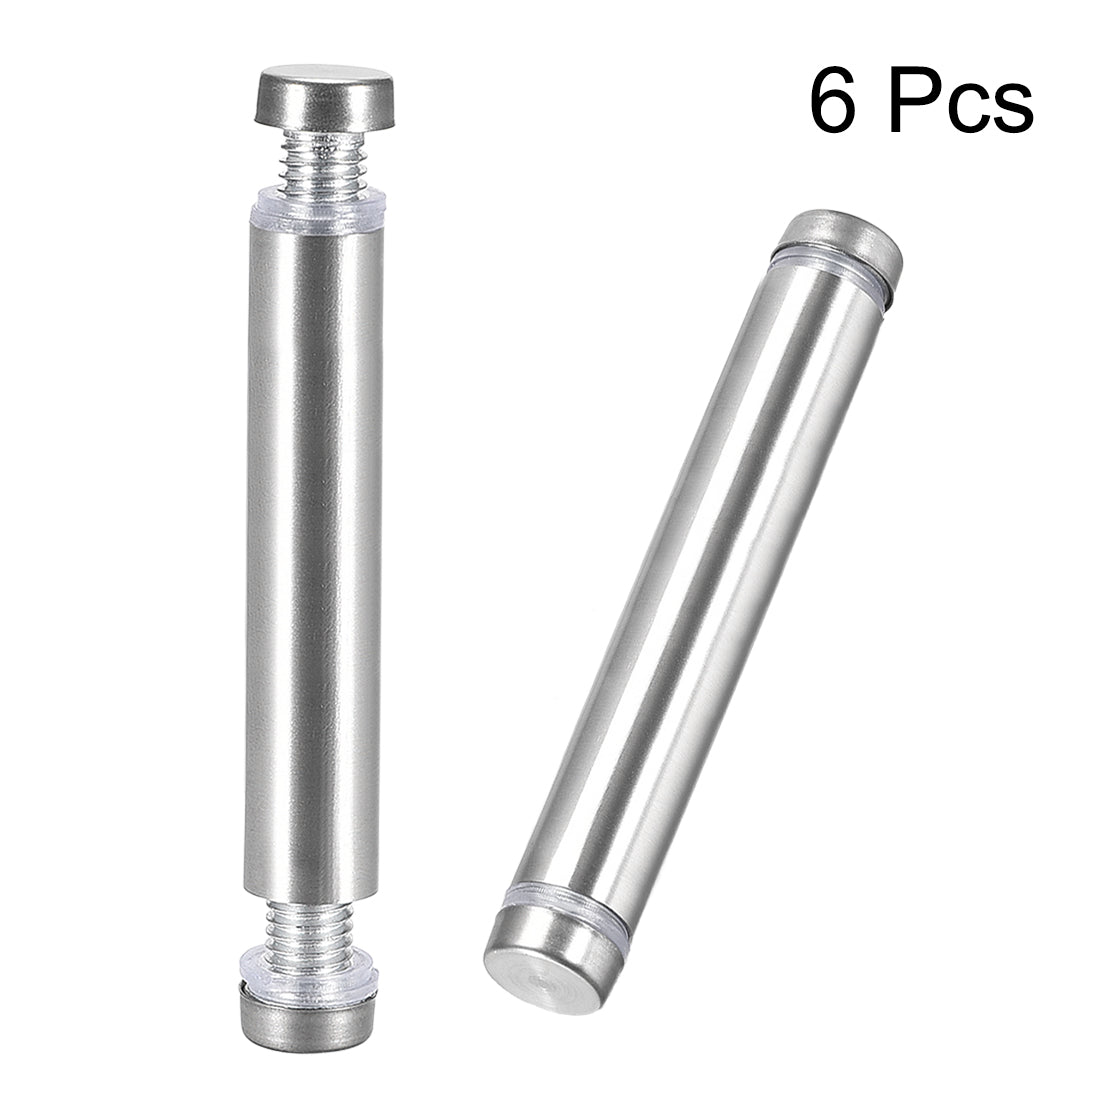 uxcell Uxcell Glass Standoff Double Head Stainless Steel Standoff Holder 12mm x 74mm 6 Pcs